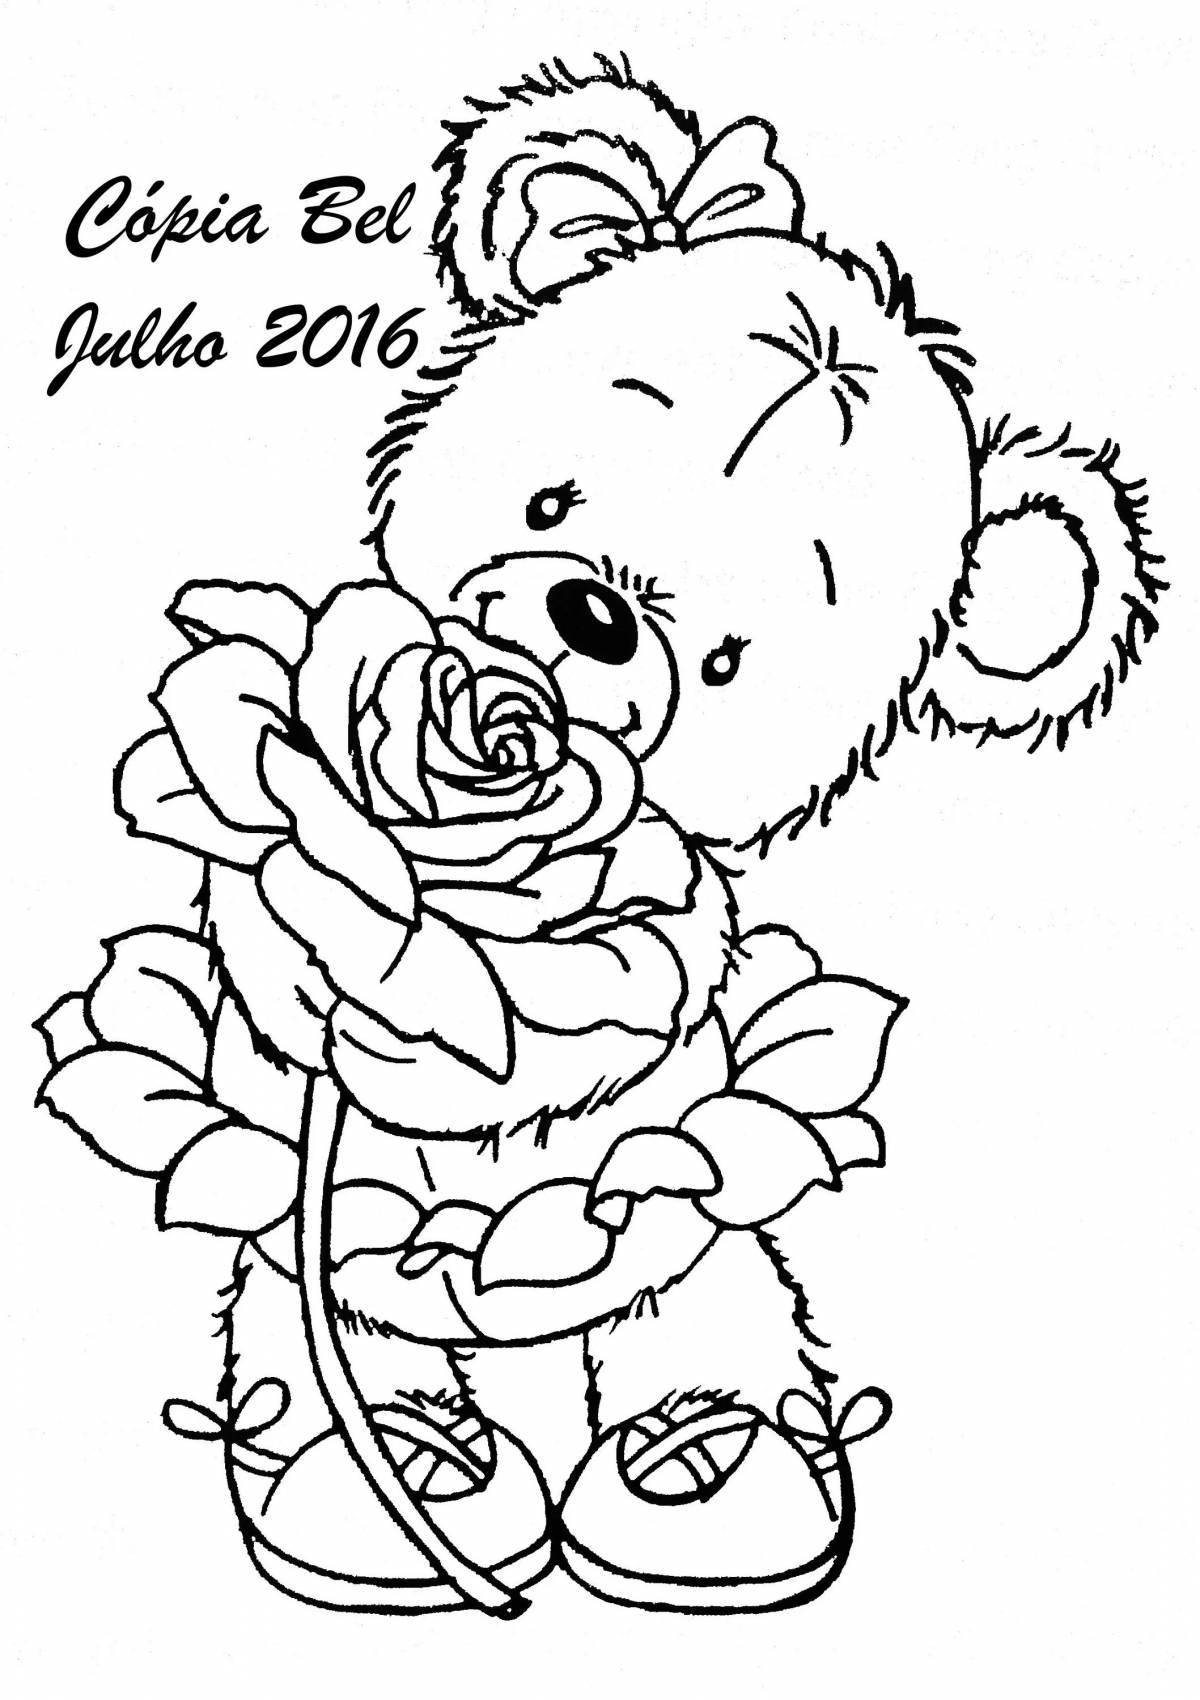 Exquisite teddy bear with flowers